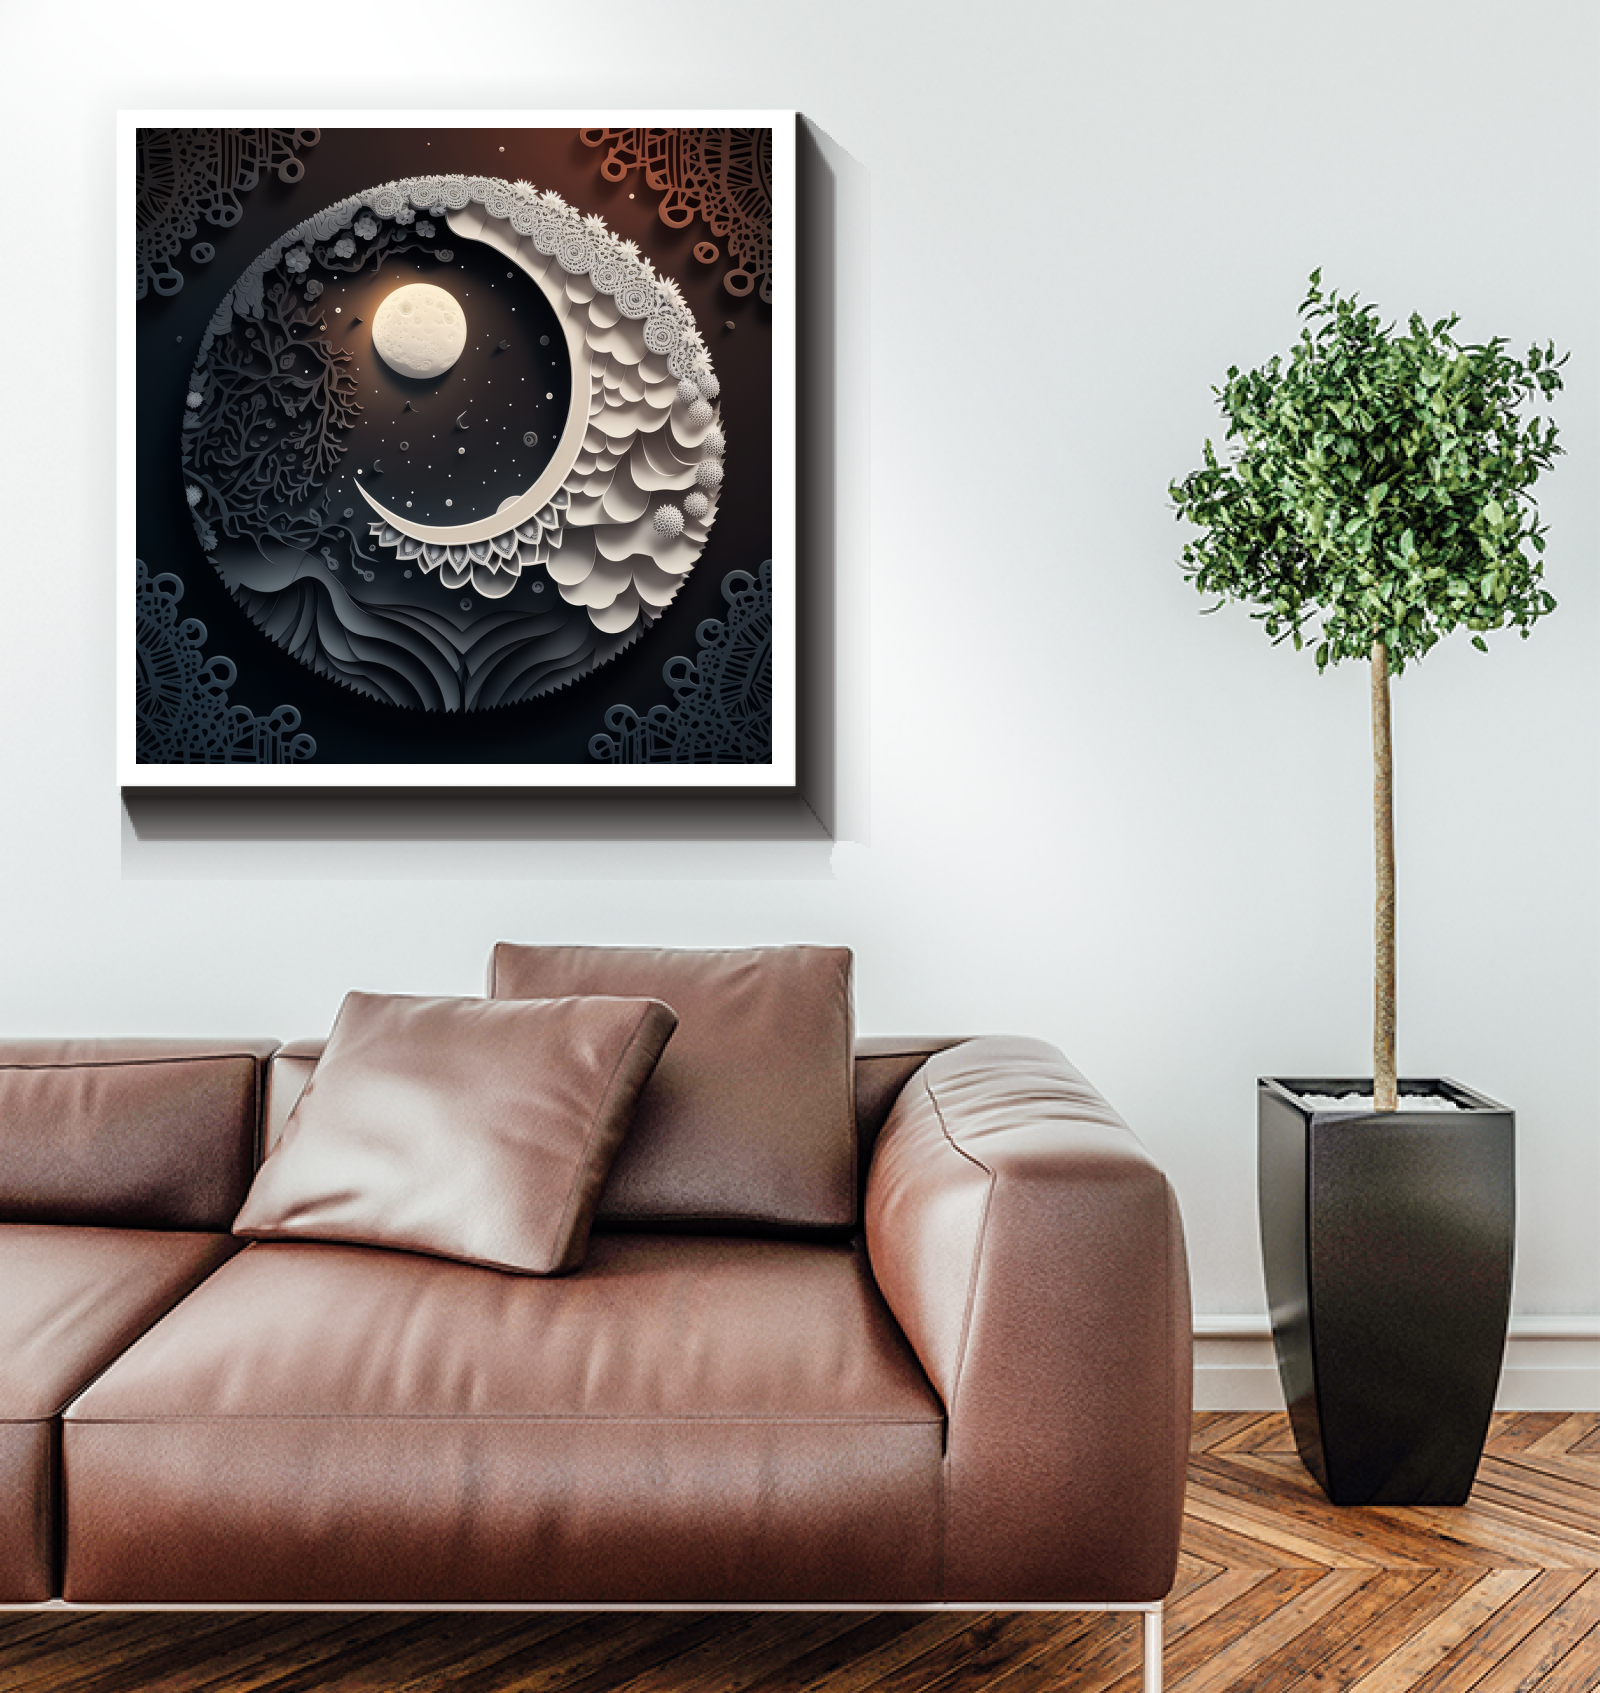 Canvas print showing the interplay between warmth and coolness.